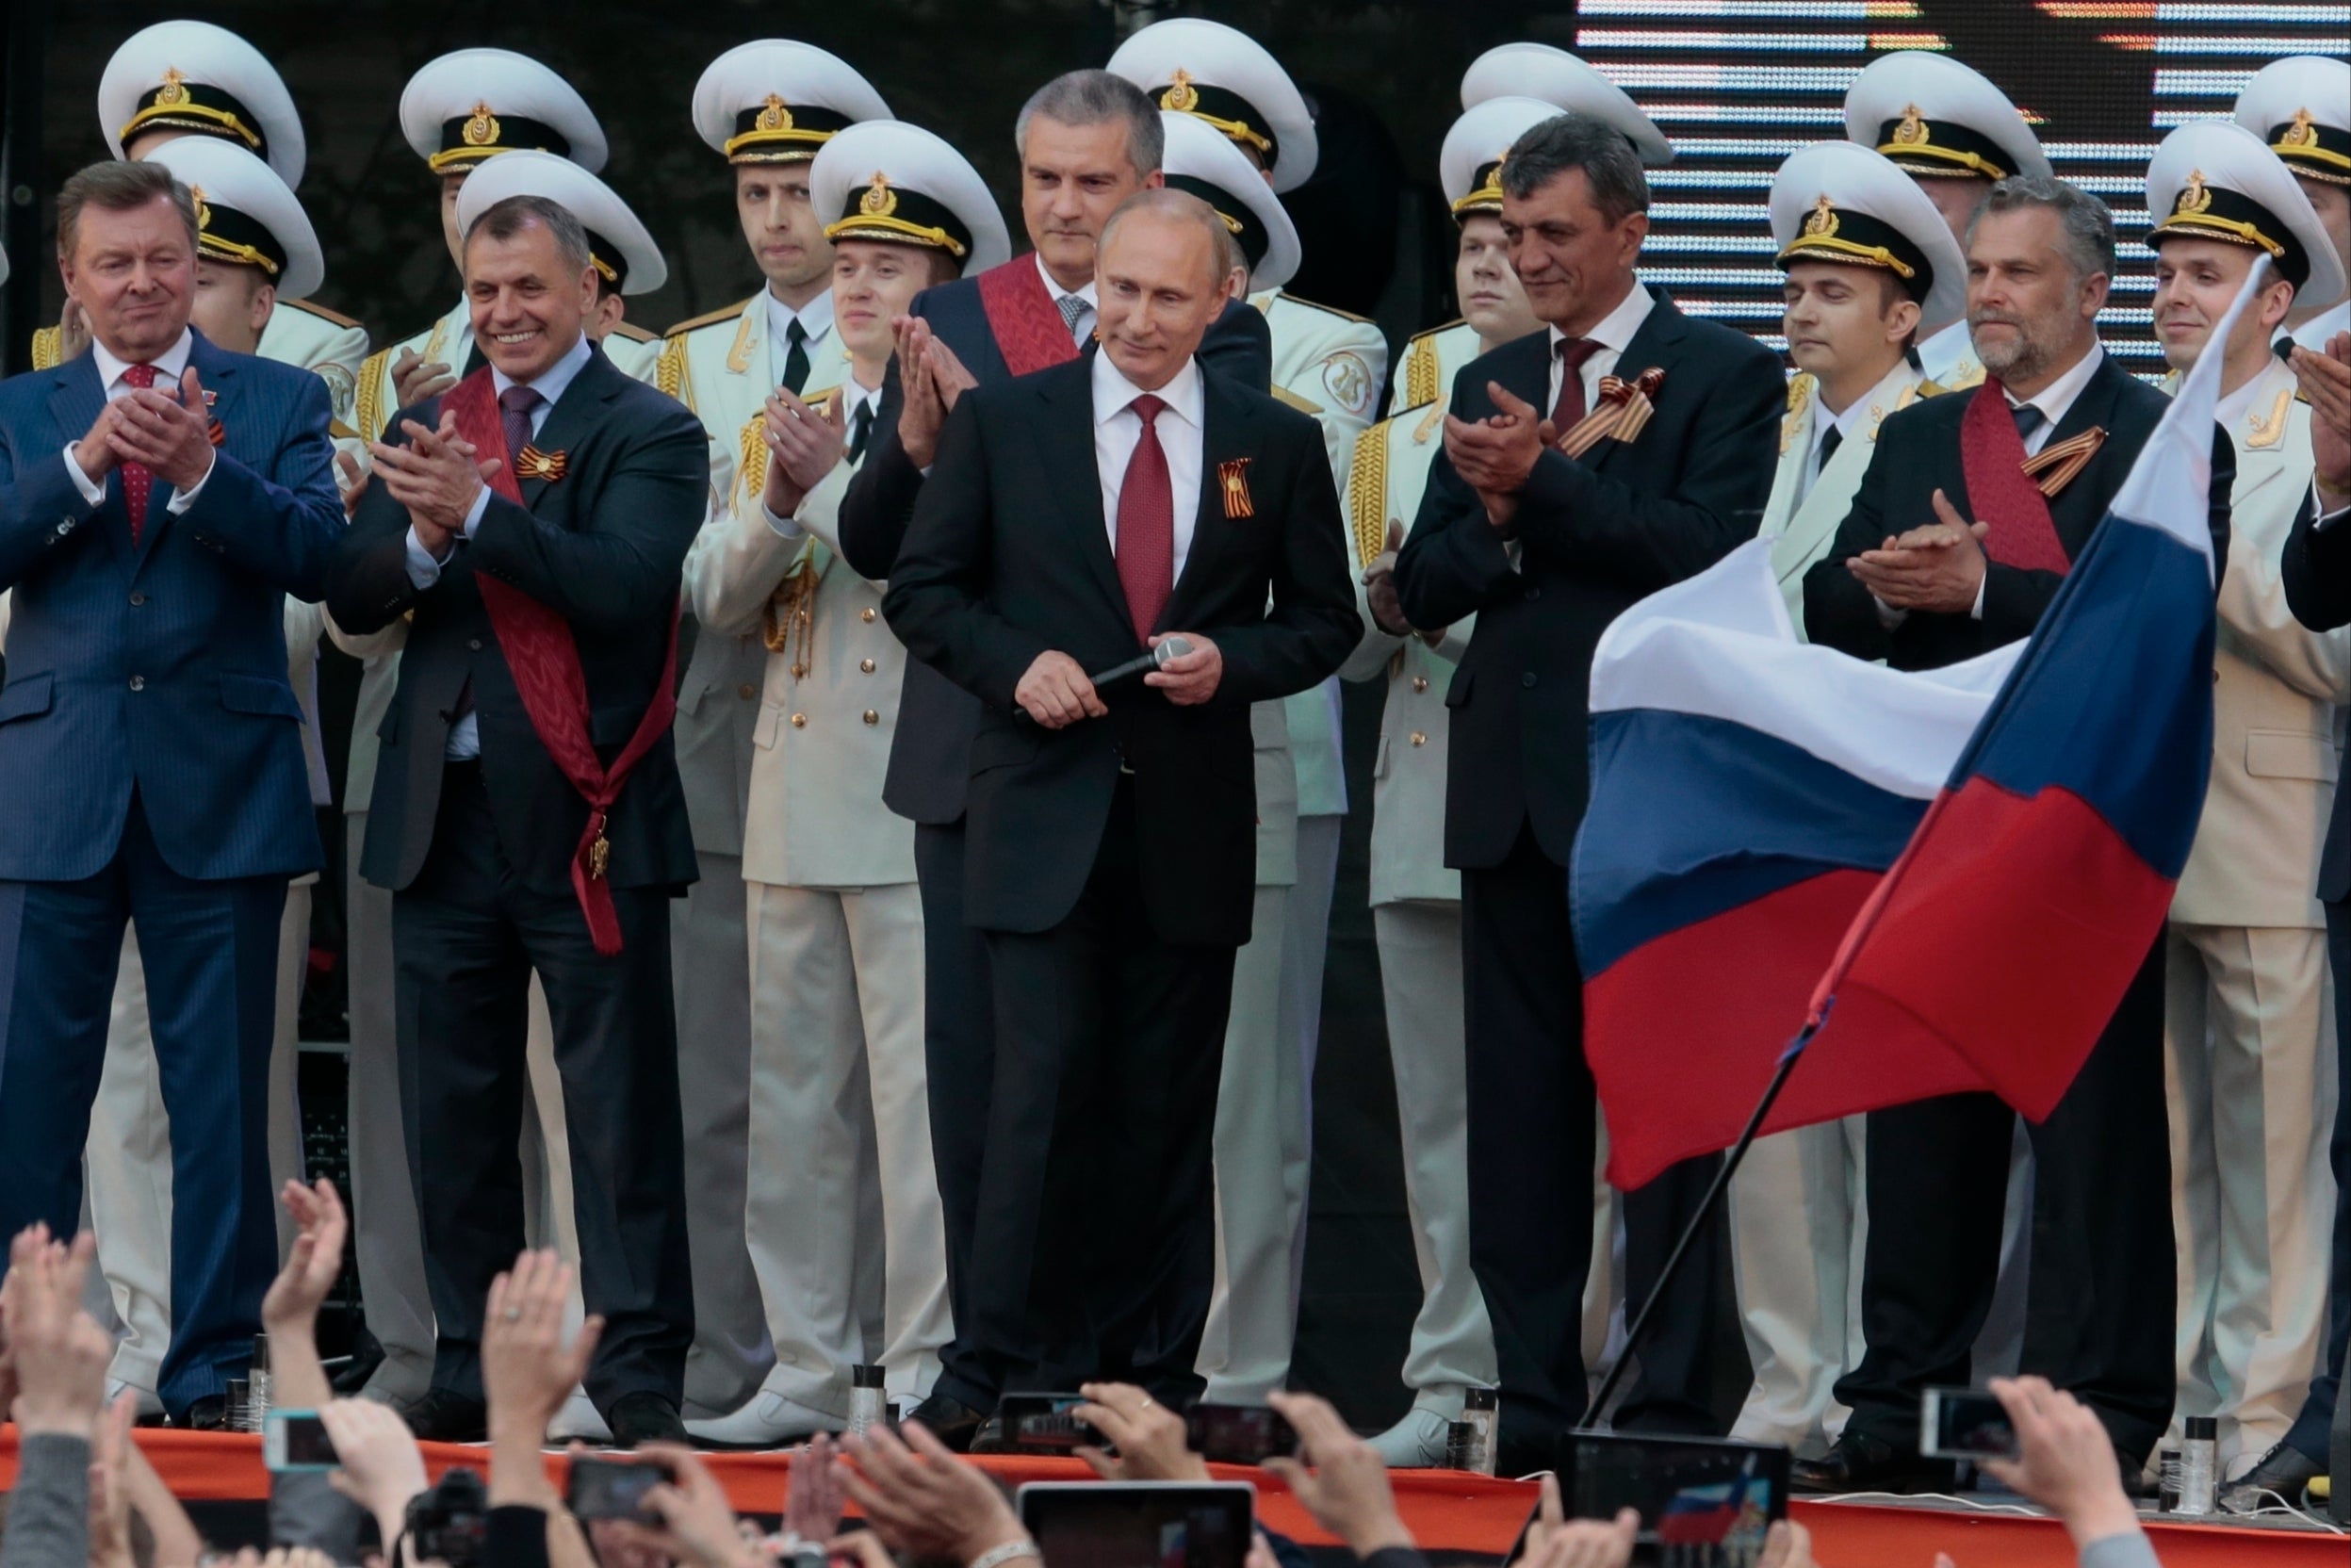 Vladimir Putin is applauded after speaking at a gala concert marking Victory Day in Sevastopol, Crimea, on 9 May 2014.